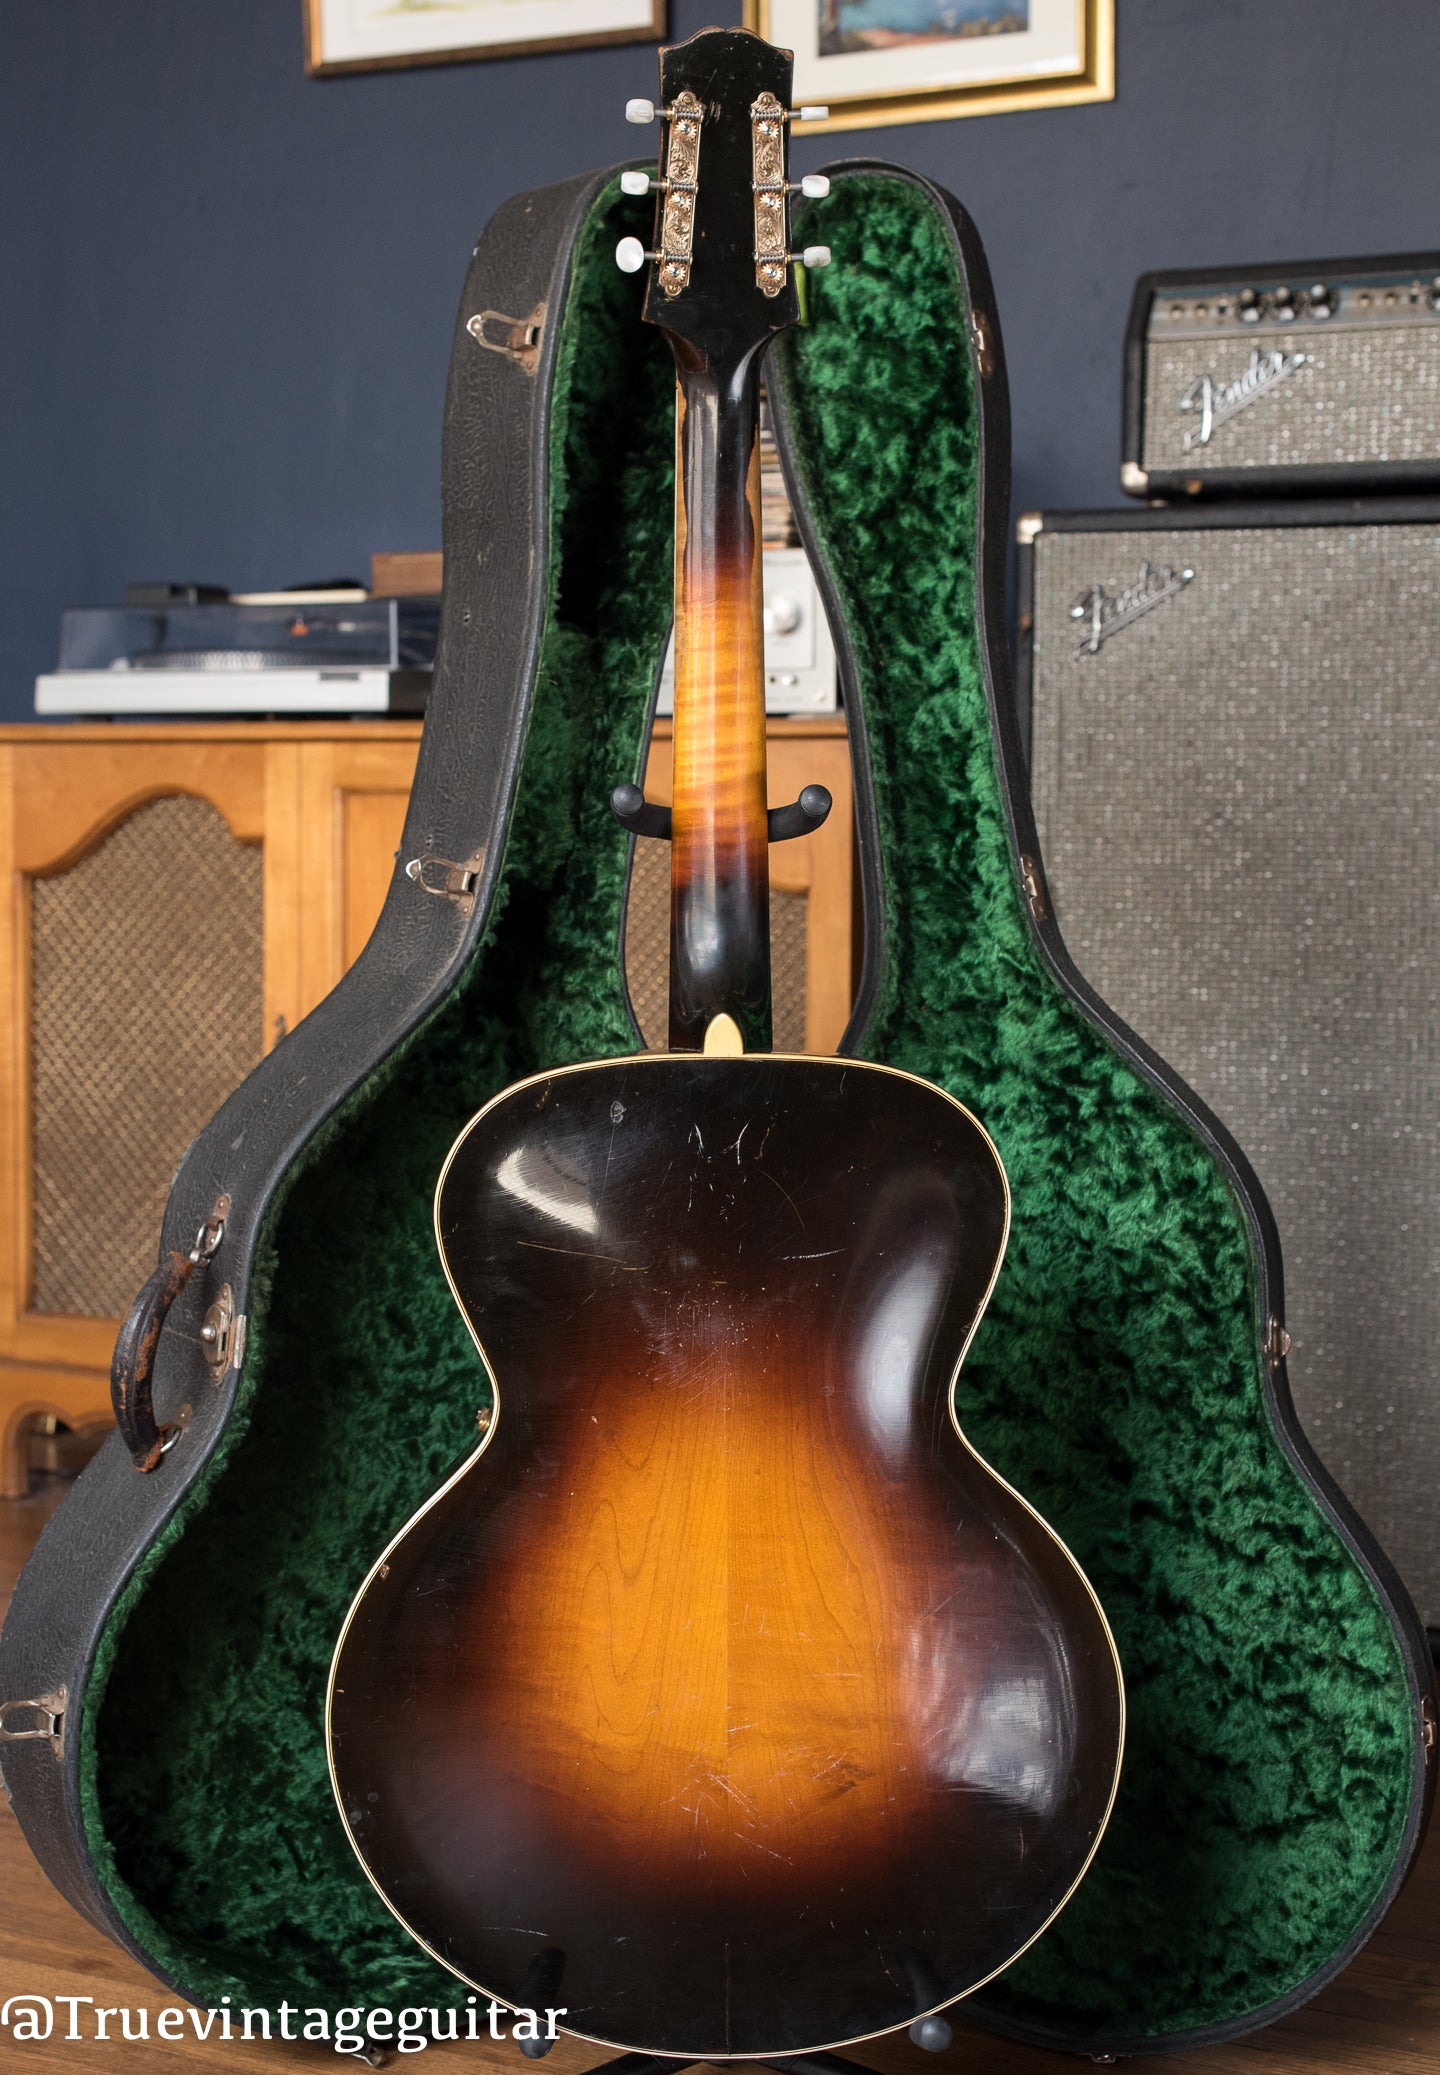 Back of neck, 1931 Gibson L-5, 16"